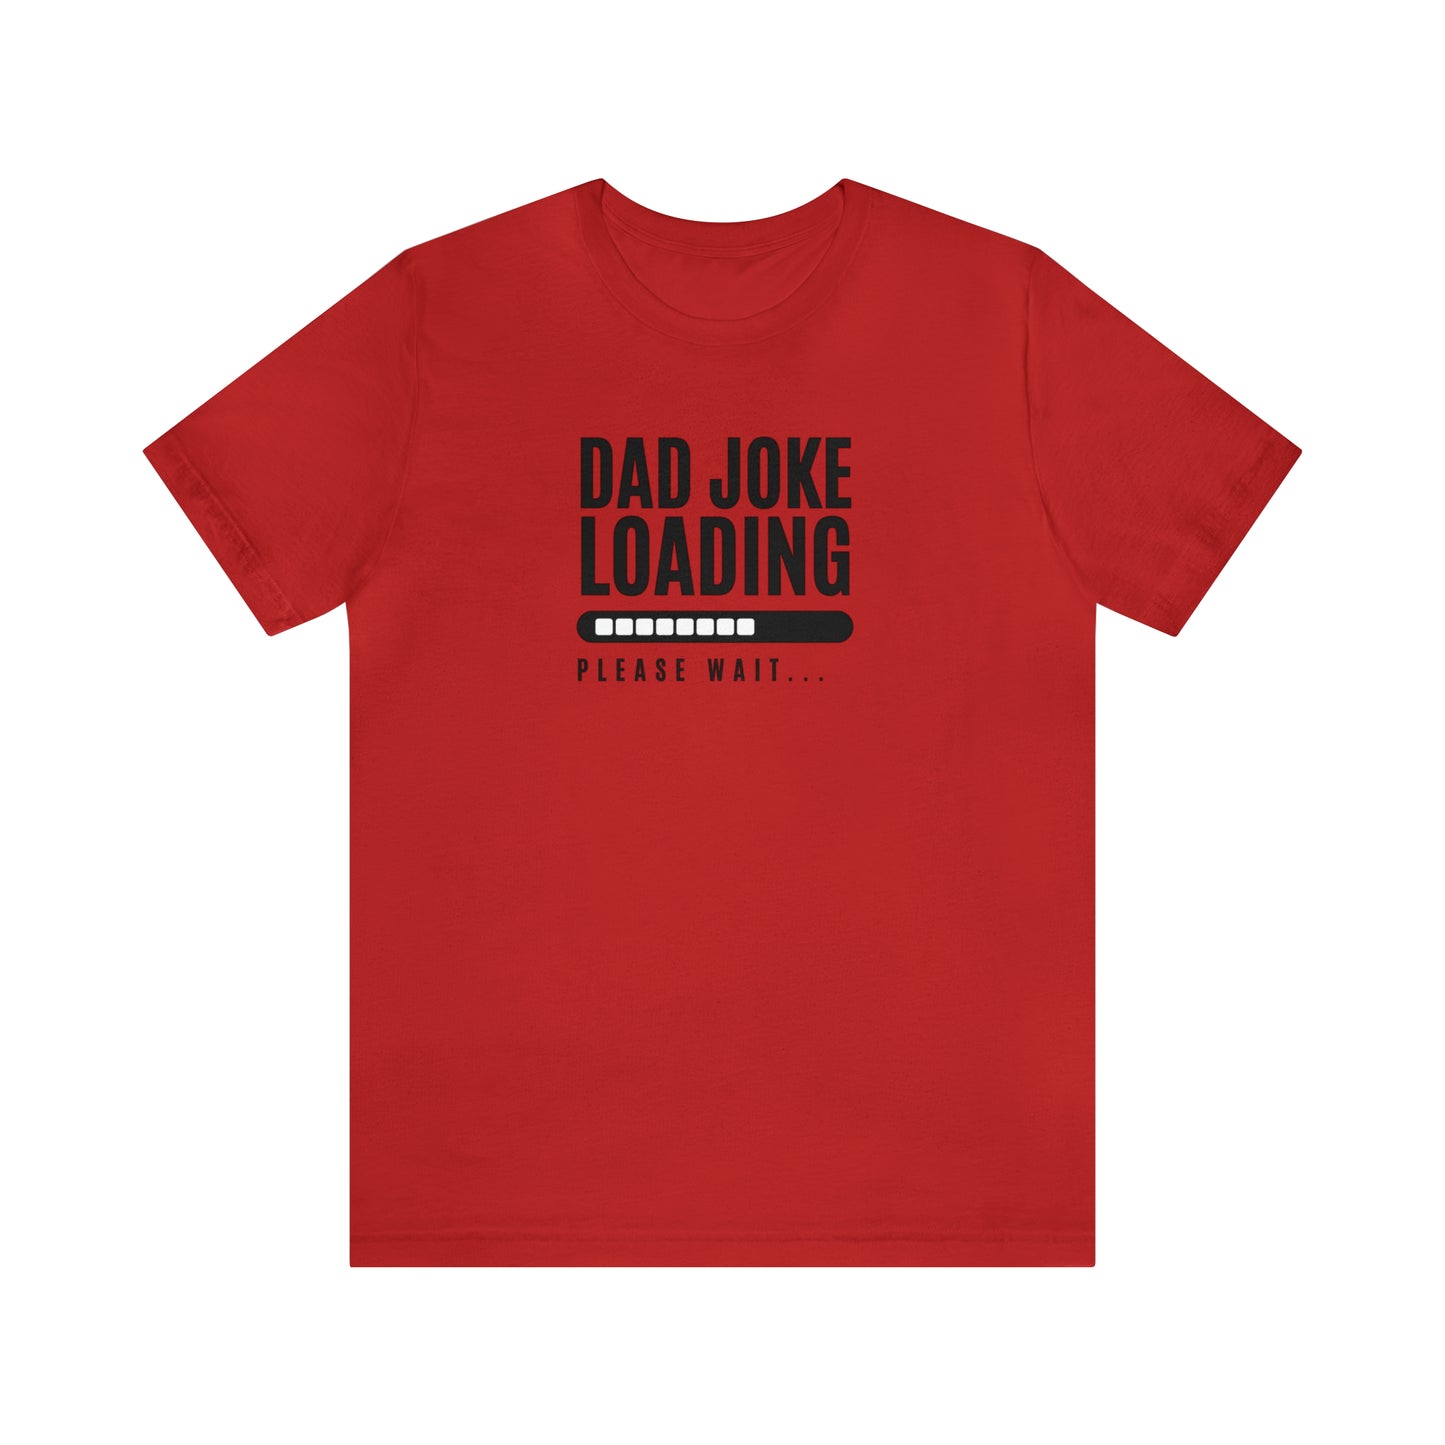 Dad Joke Loading Shirt, Not a Morning Person, Sarcastic Funny Shirt for Men, Best Dad Ever Tee, Fathers Day Gift, Dad Birthday Gift, Dad Bod